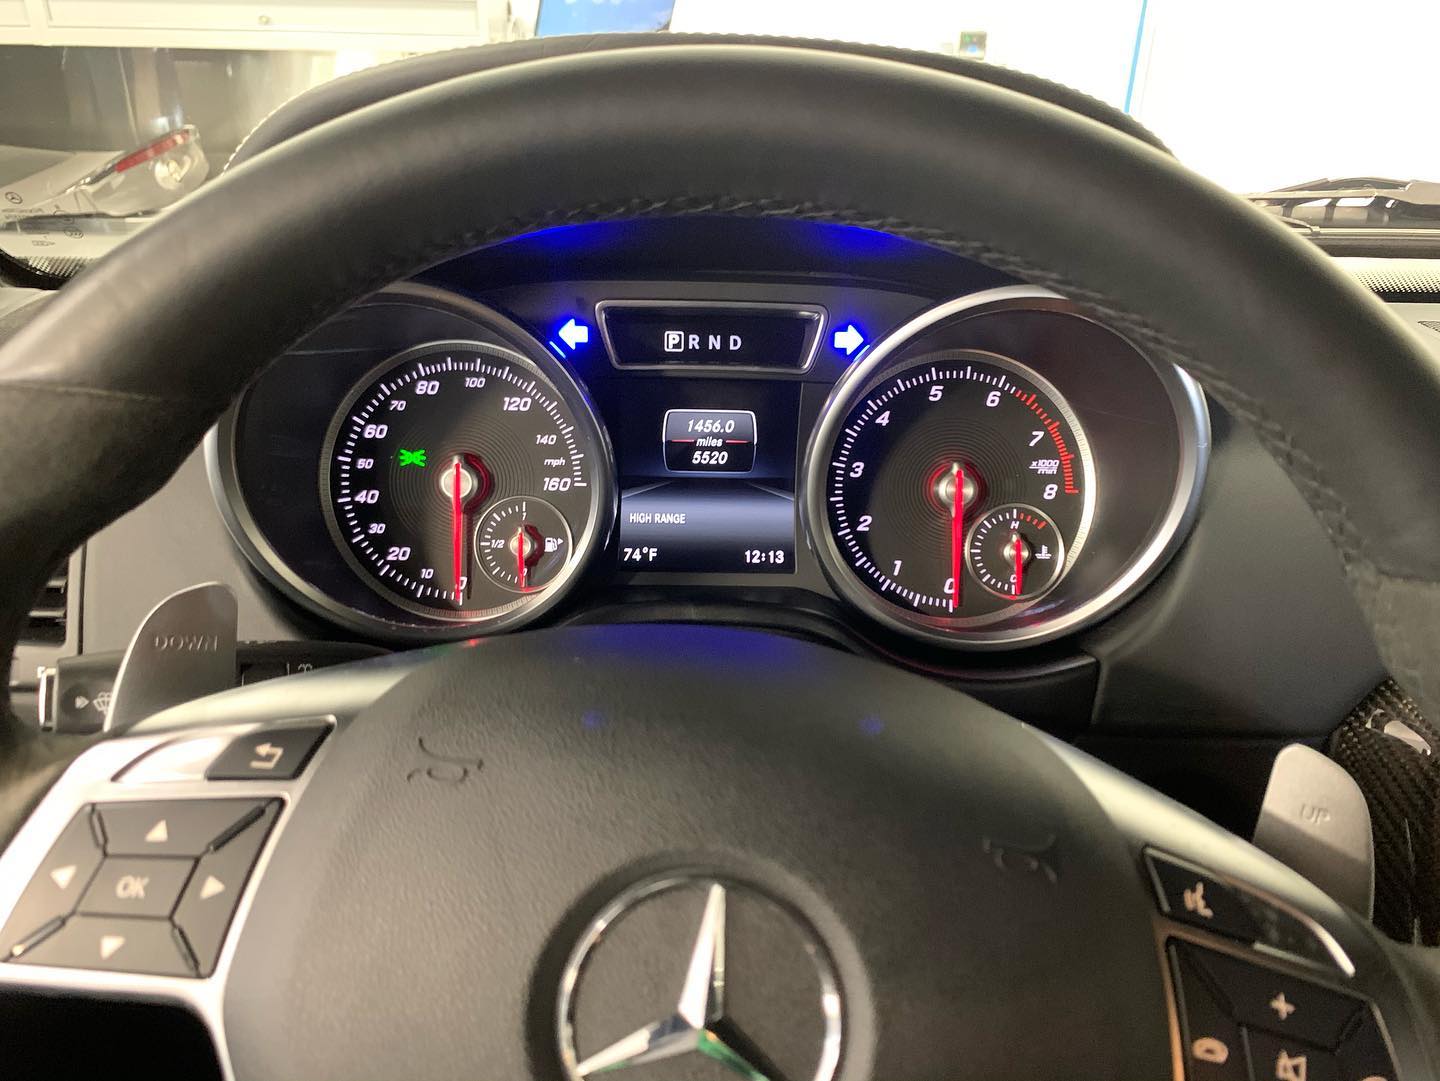 K40 Custom Hidden LED alerts installed in the turn signals of a 2018 Mercedes Benz G-Wagon 4 X 4 in Delray Beach, FL